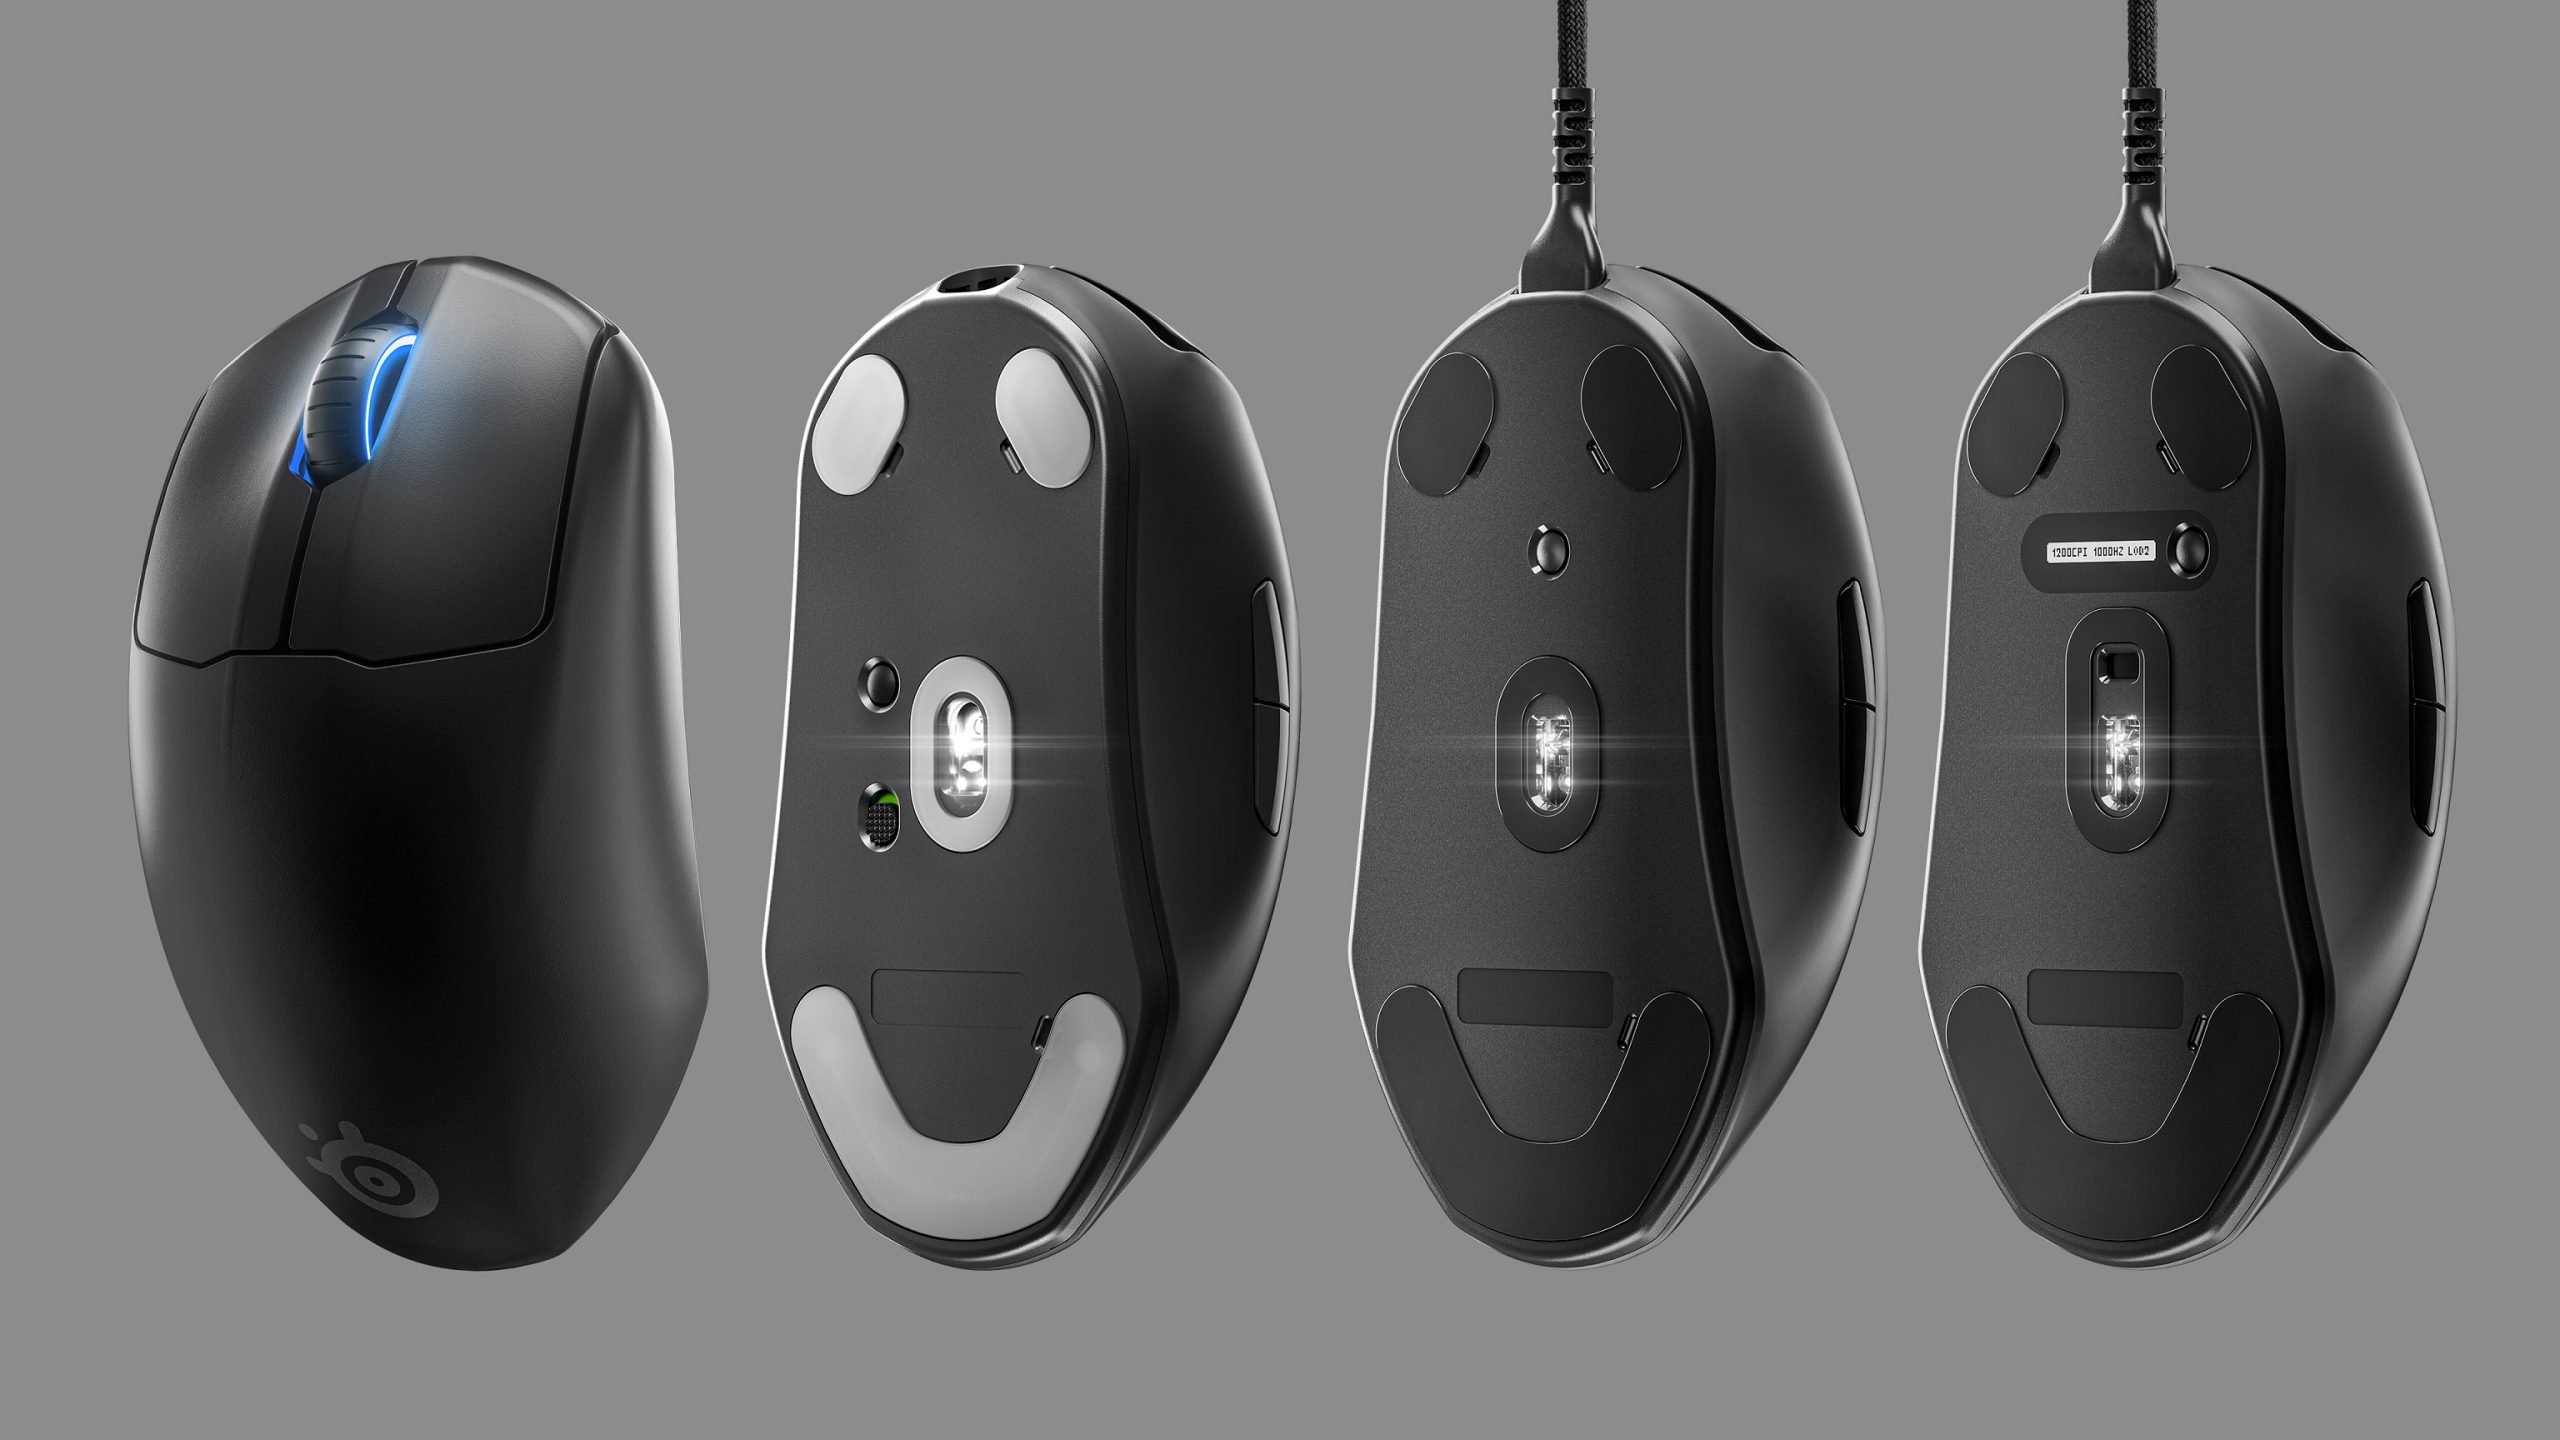 steelseries-Prime-serisi-mouse-scaled.jpg